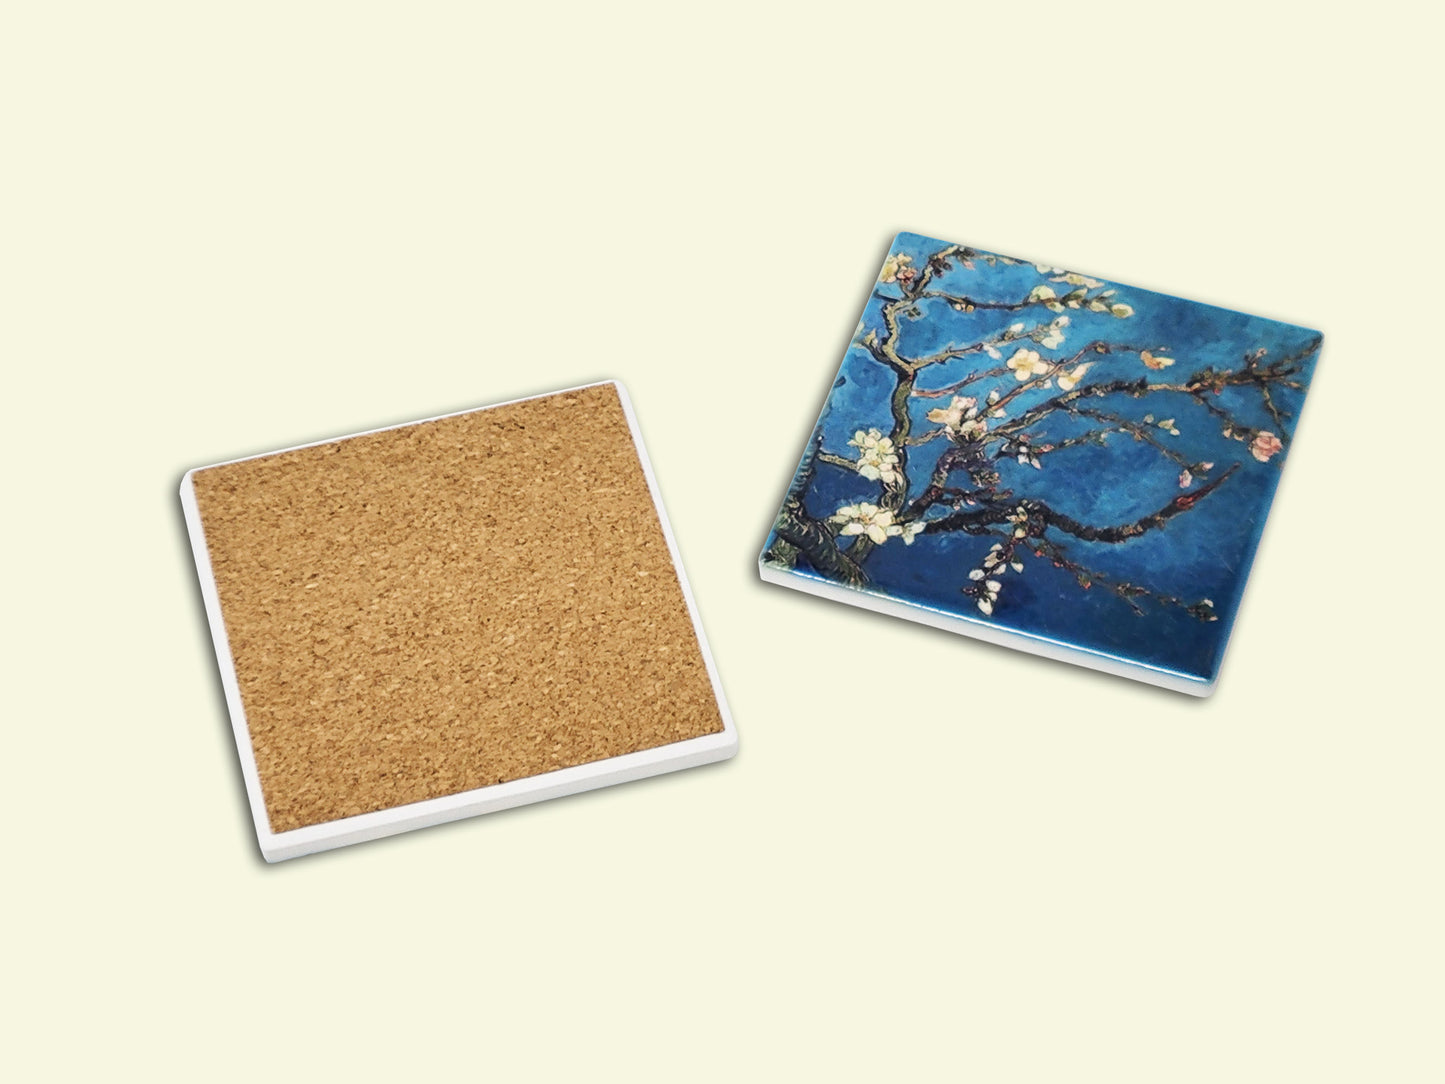 Ceramic Coaster with Art Inspired by Van Gogh